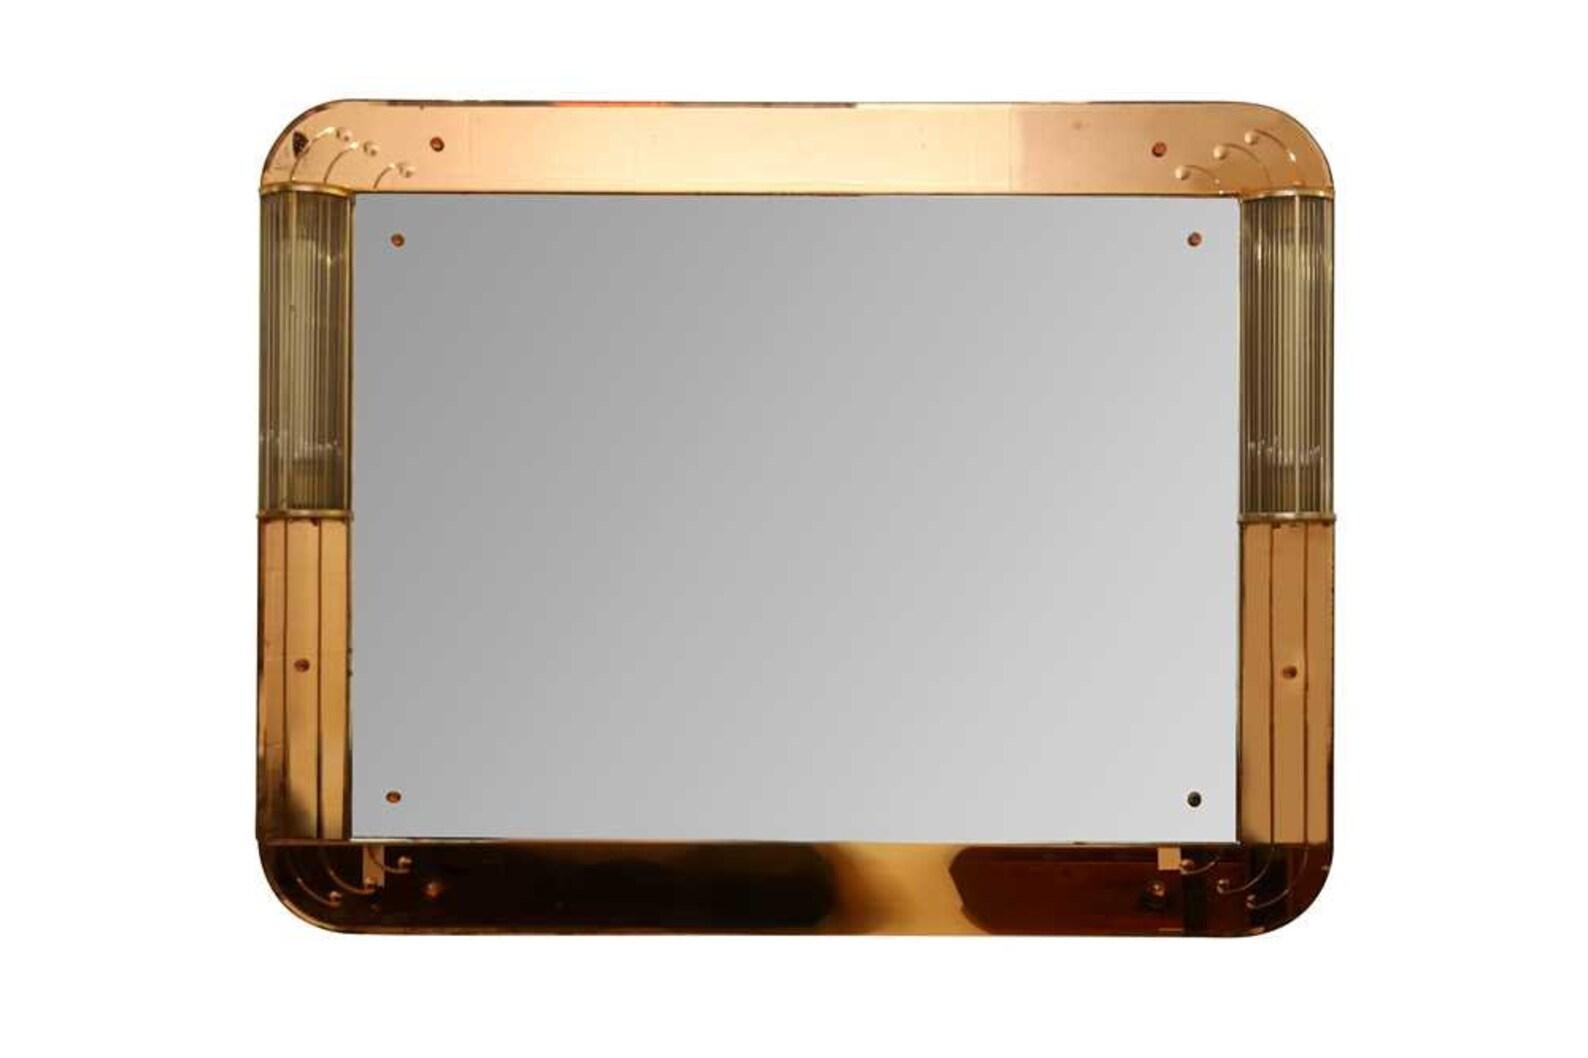 Art Deco Peach Glass Rectangular Bevel Edged Wall Mirror Peach Glass Has Etched Features & Rounded Corners

The Mirror is Flanked by a Pair of Lights with Shades Formed of Vertical Glass Cylinders 1920s

From the estate of Judith Found textile